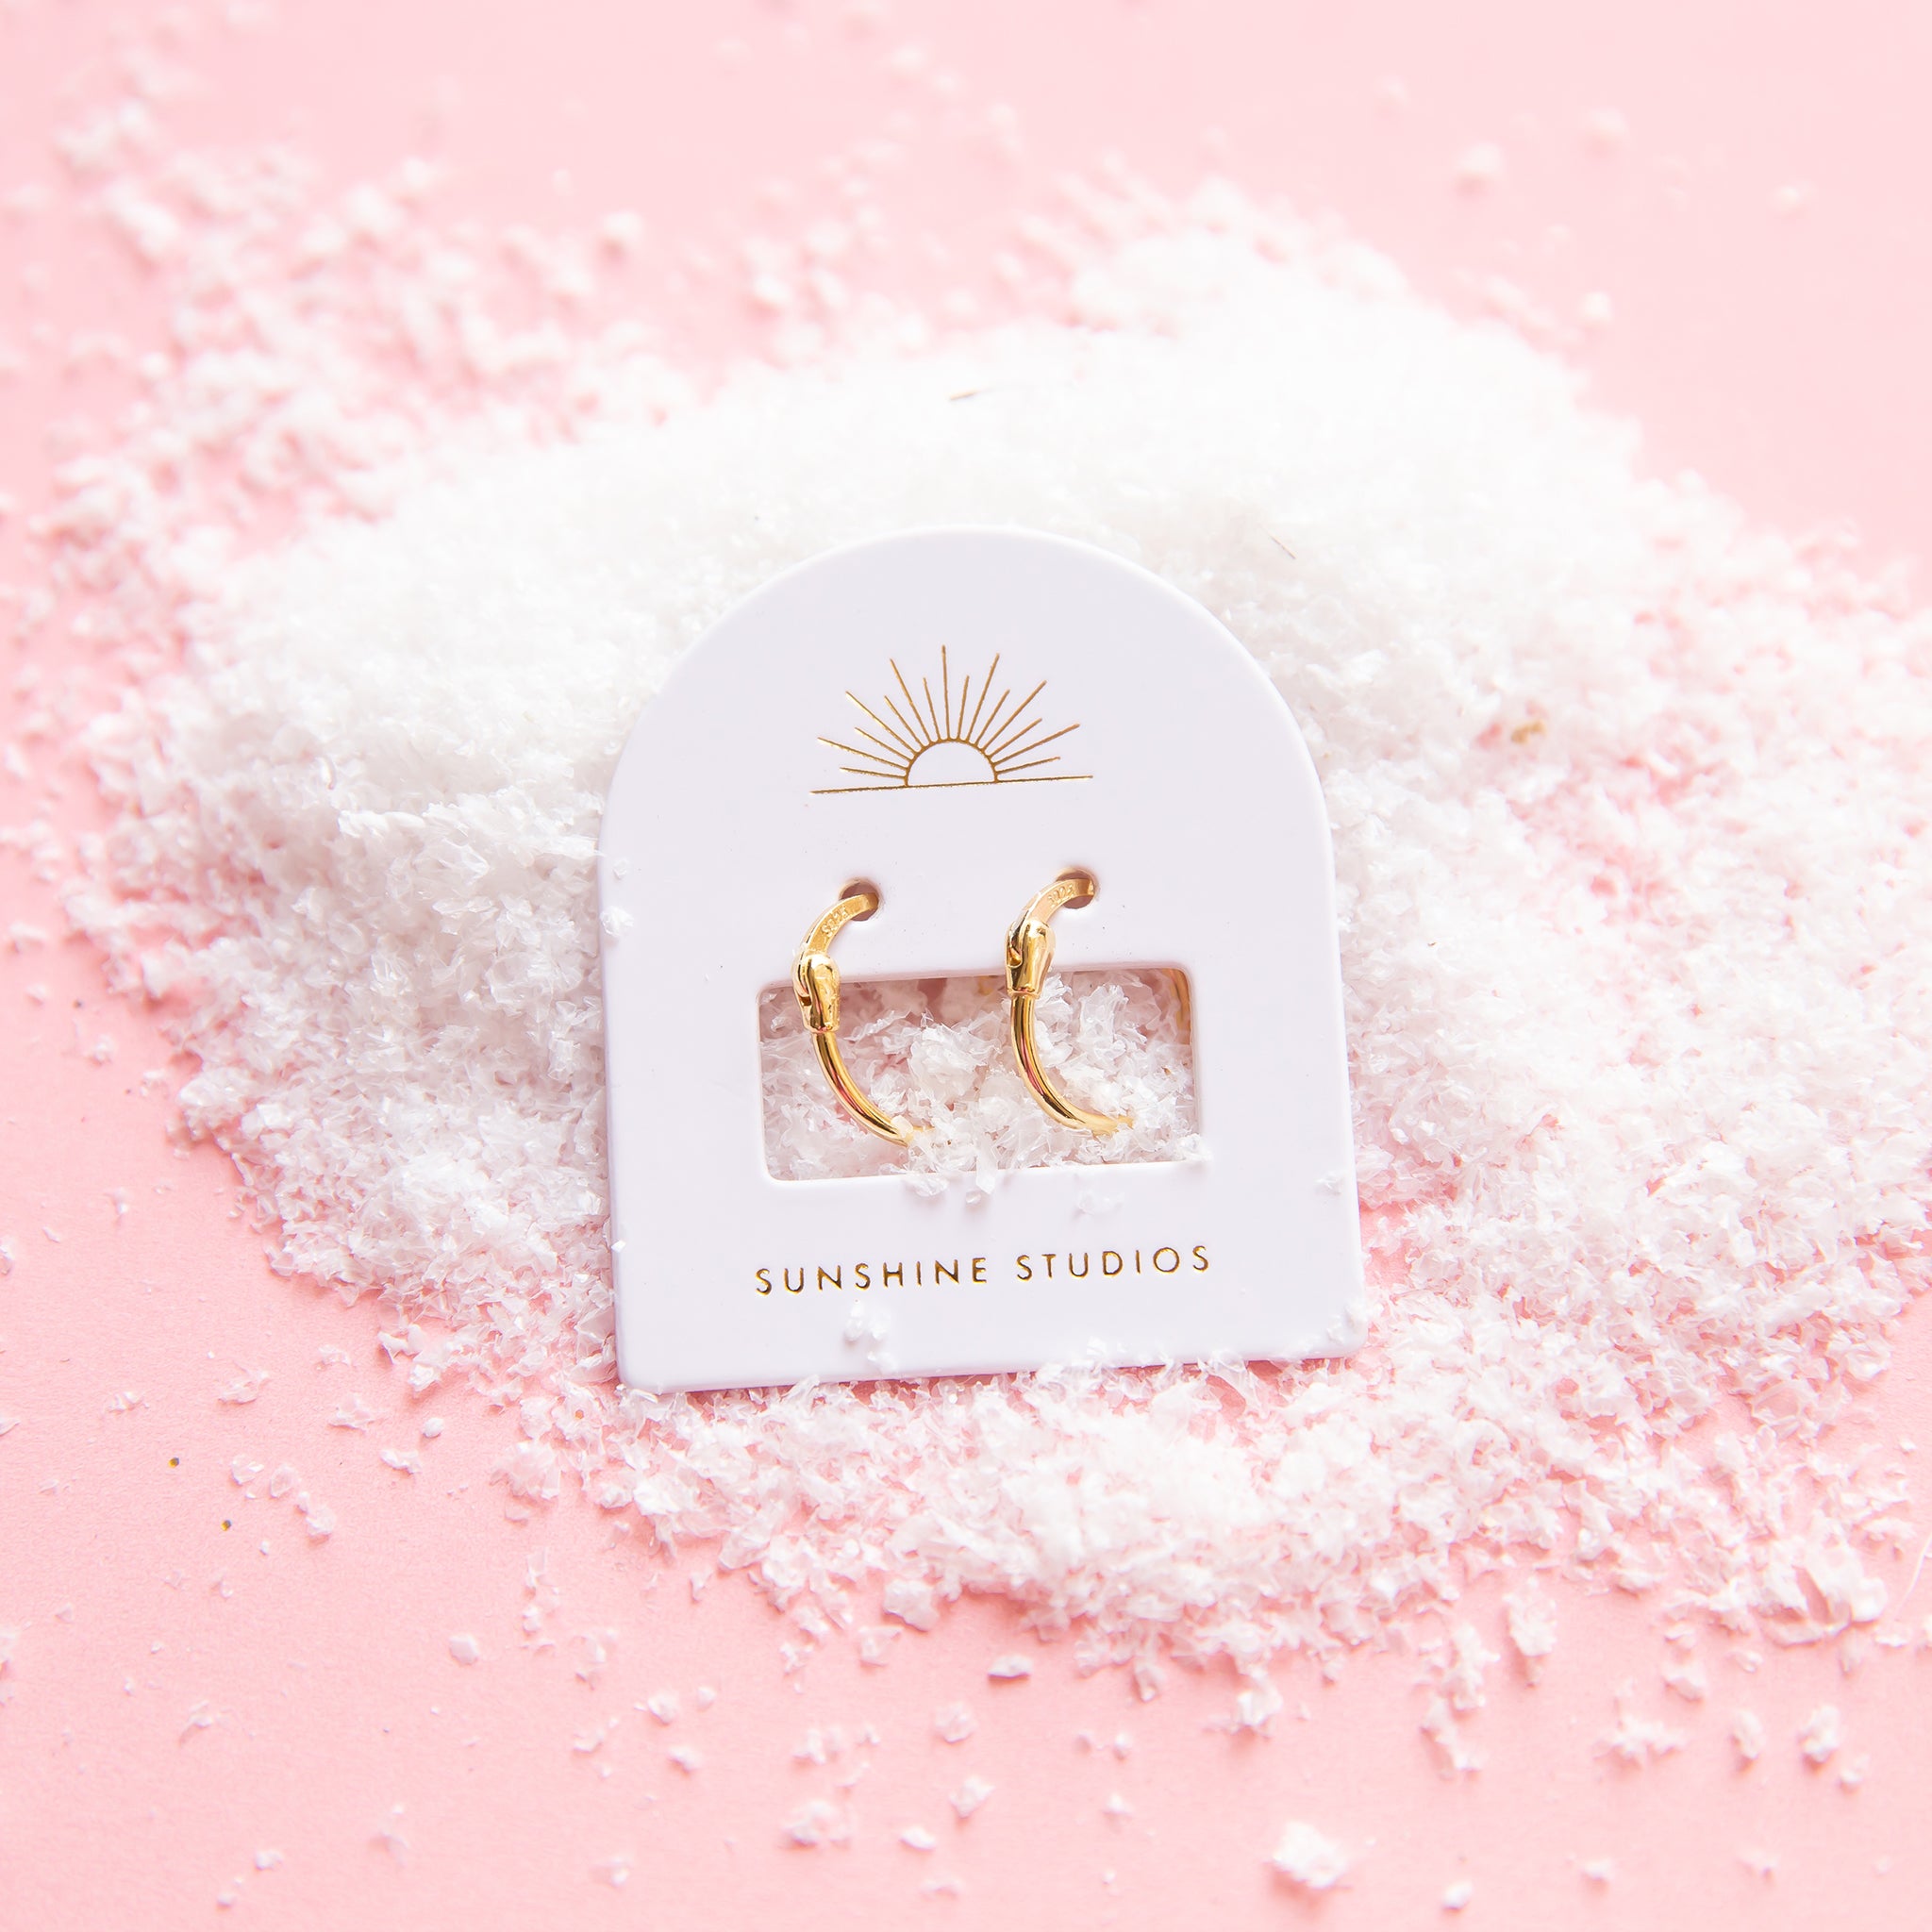 On a pink snowy background is a pair of thin gold hoop earrings on their arched packaging that features a sun ray logo at the top and gold text at the bottom that reads, &quot;Sunshine Studios&quot;.